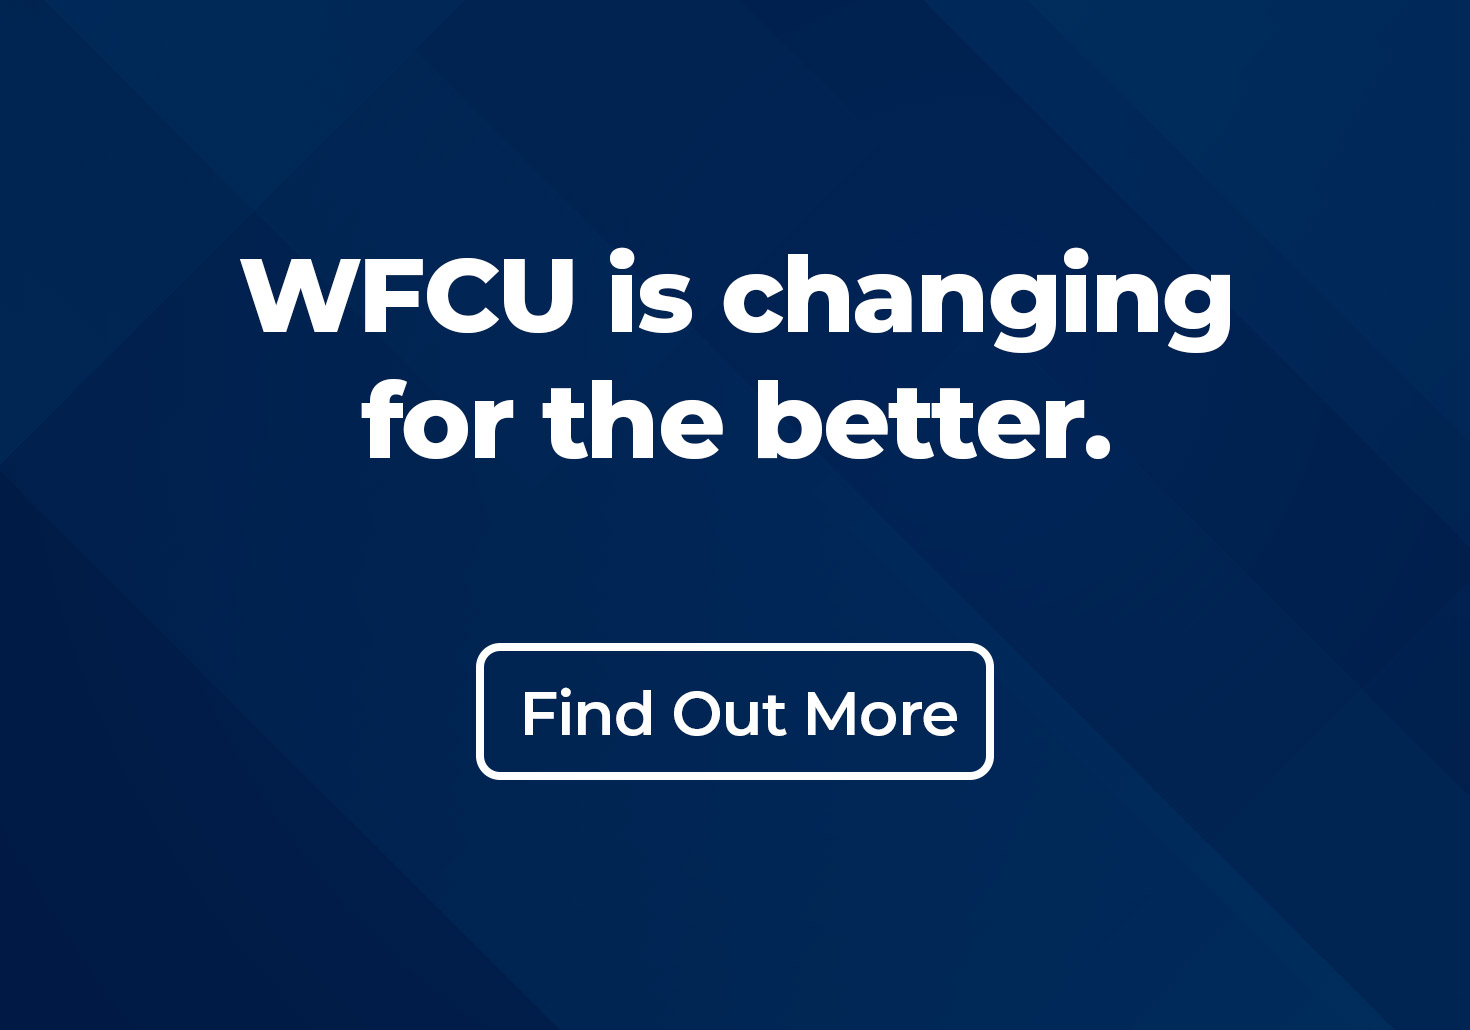 WFCU is changing for the better. Click to find out more.